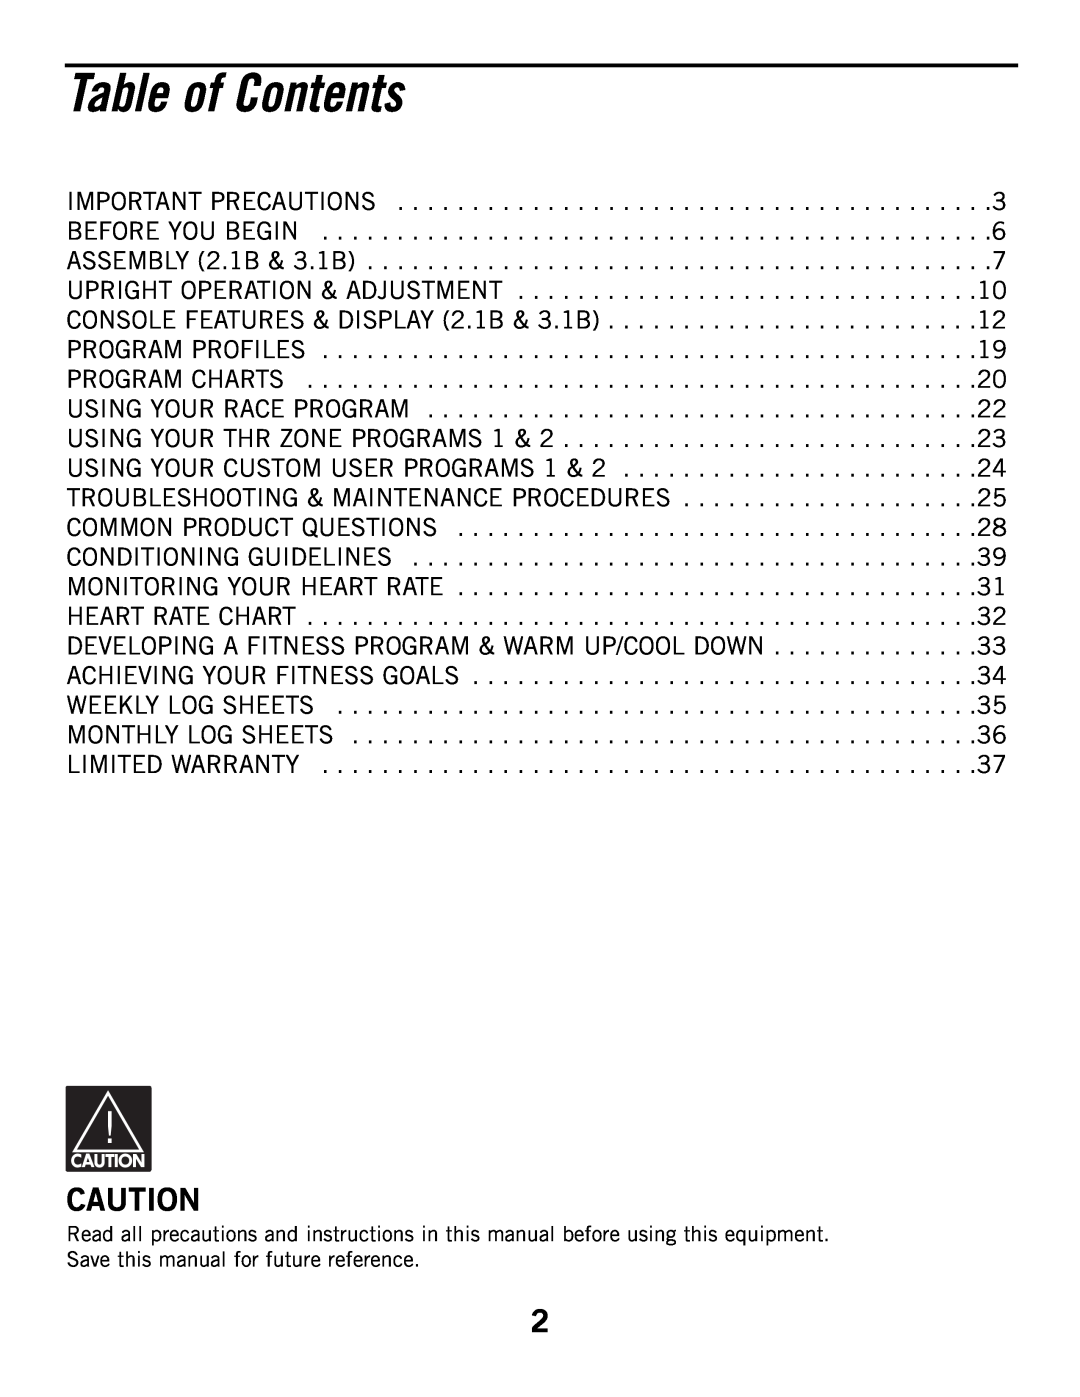 Horizon Fitness 3.1B, 2.1B manual Table of Contents 